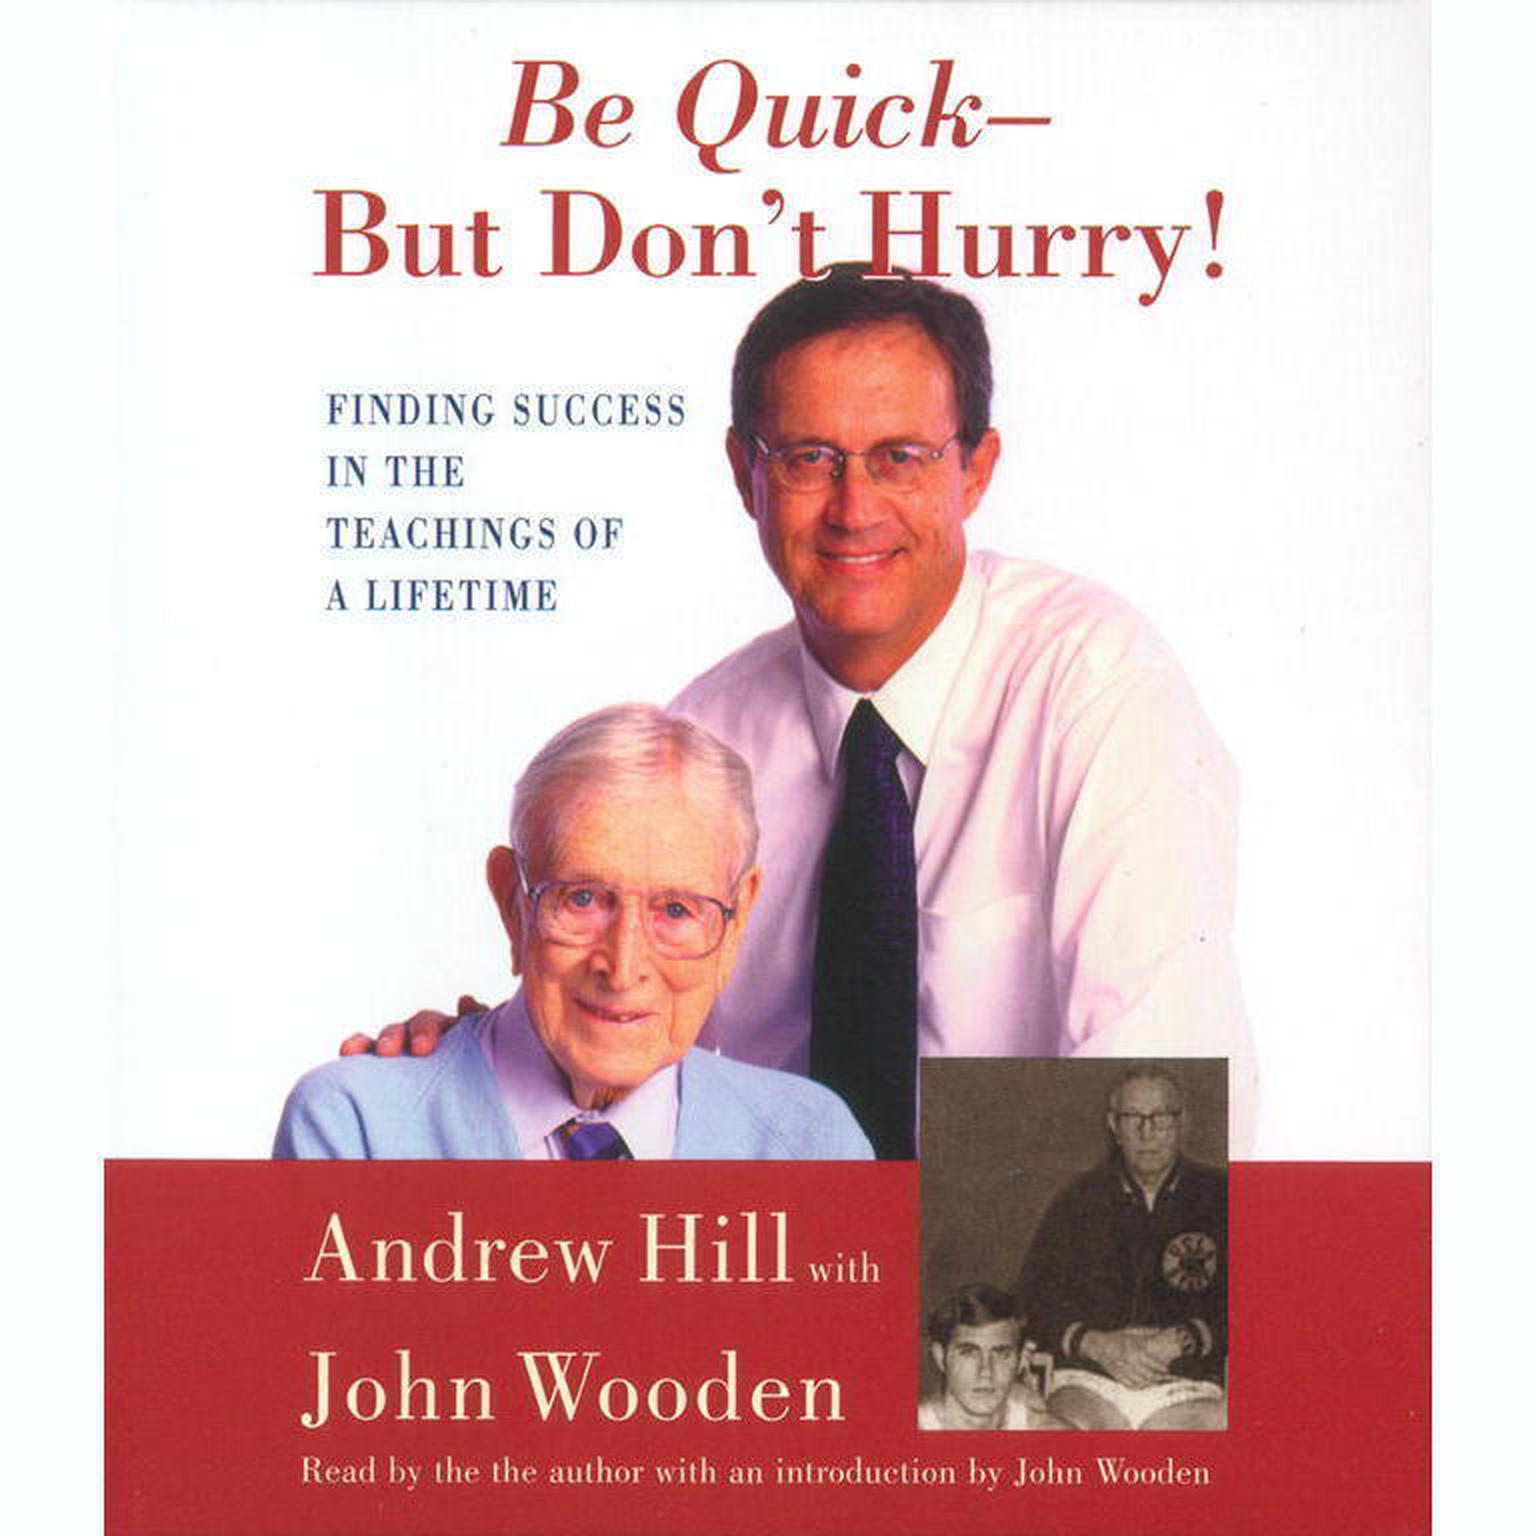 Be Quick—but Don’t Hurry: Finding Success in the Teachings of a Lifetime Audiobook, by Andrew Hill